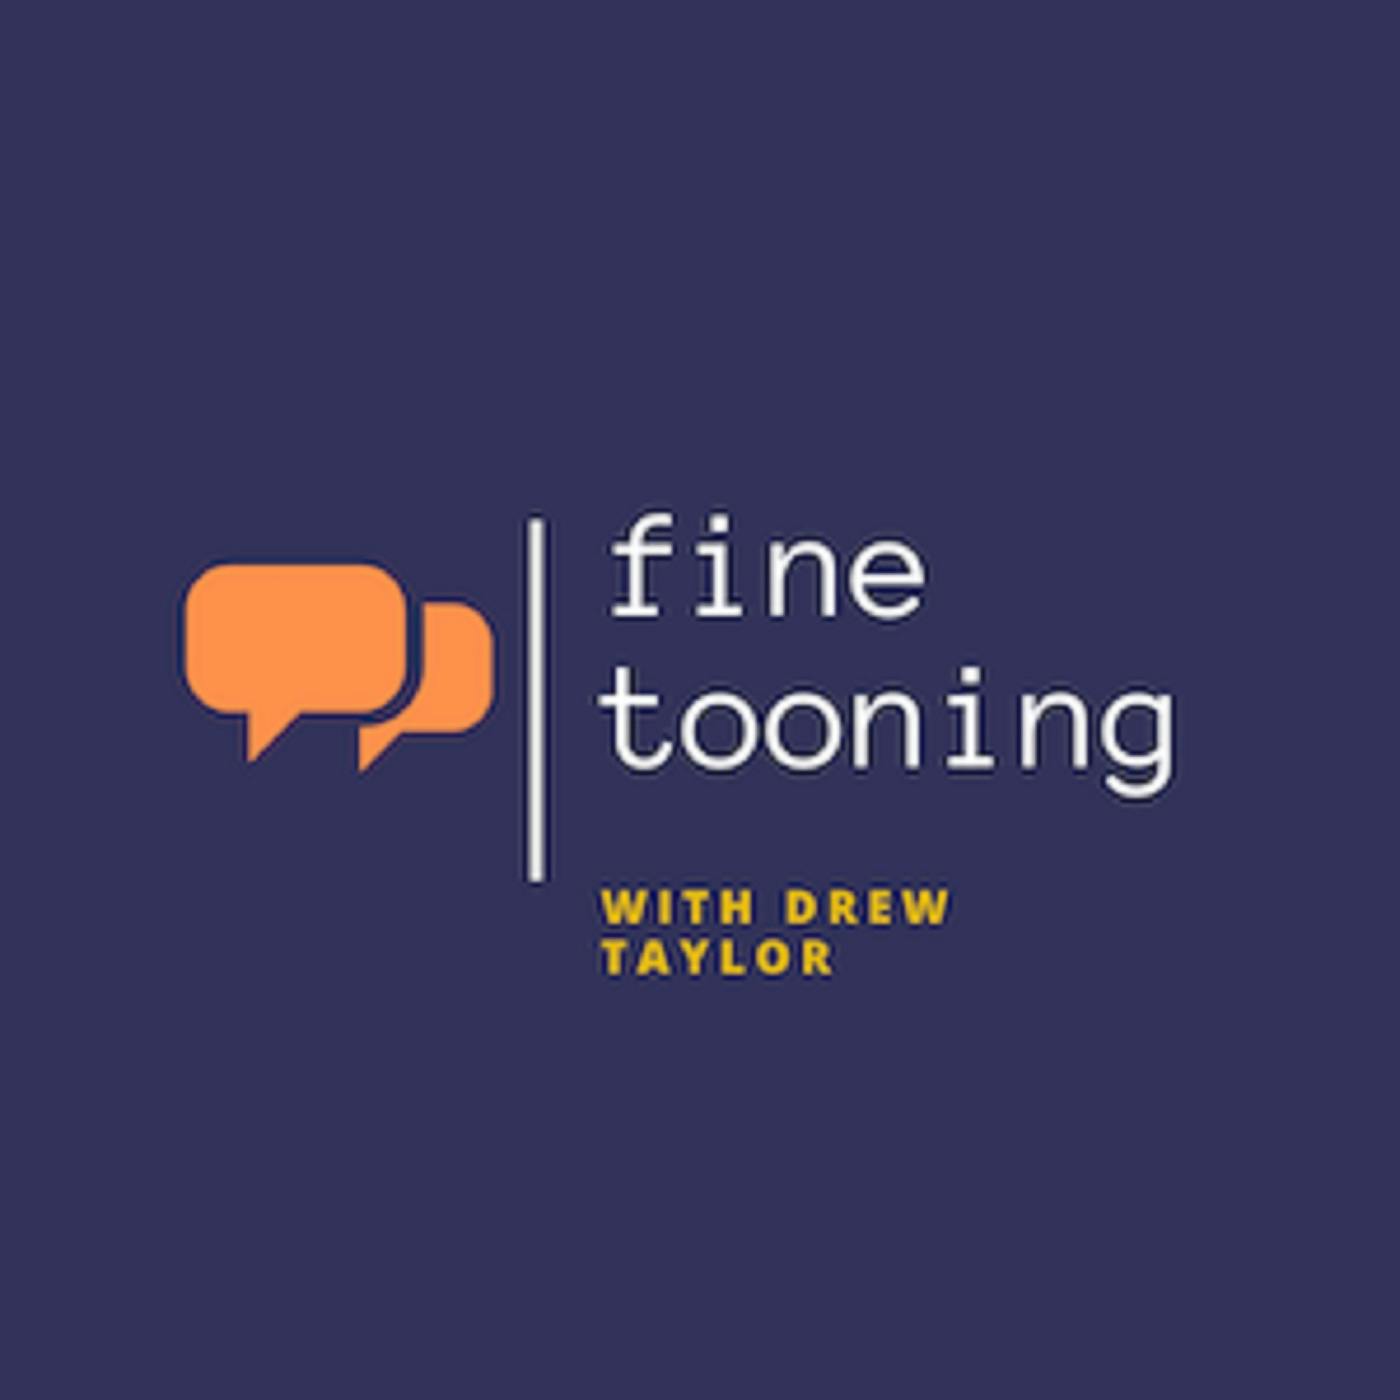 Fine Tooning With Drew Taylor - Episode 234: Which obscure Disney toons turn up in “Once Upon a Studio”